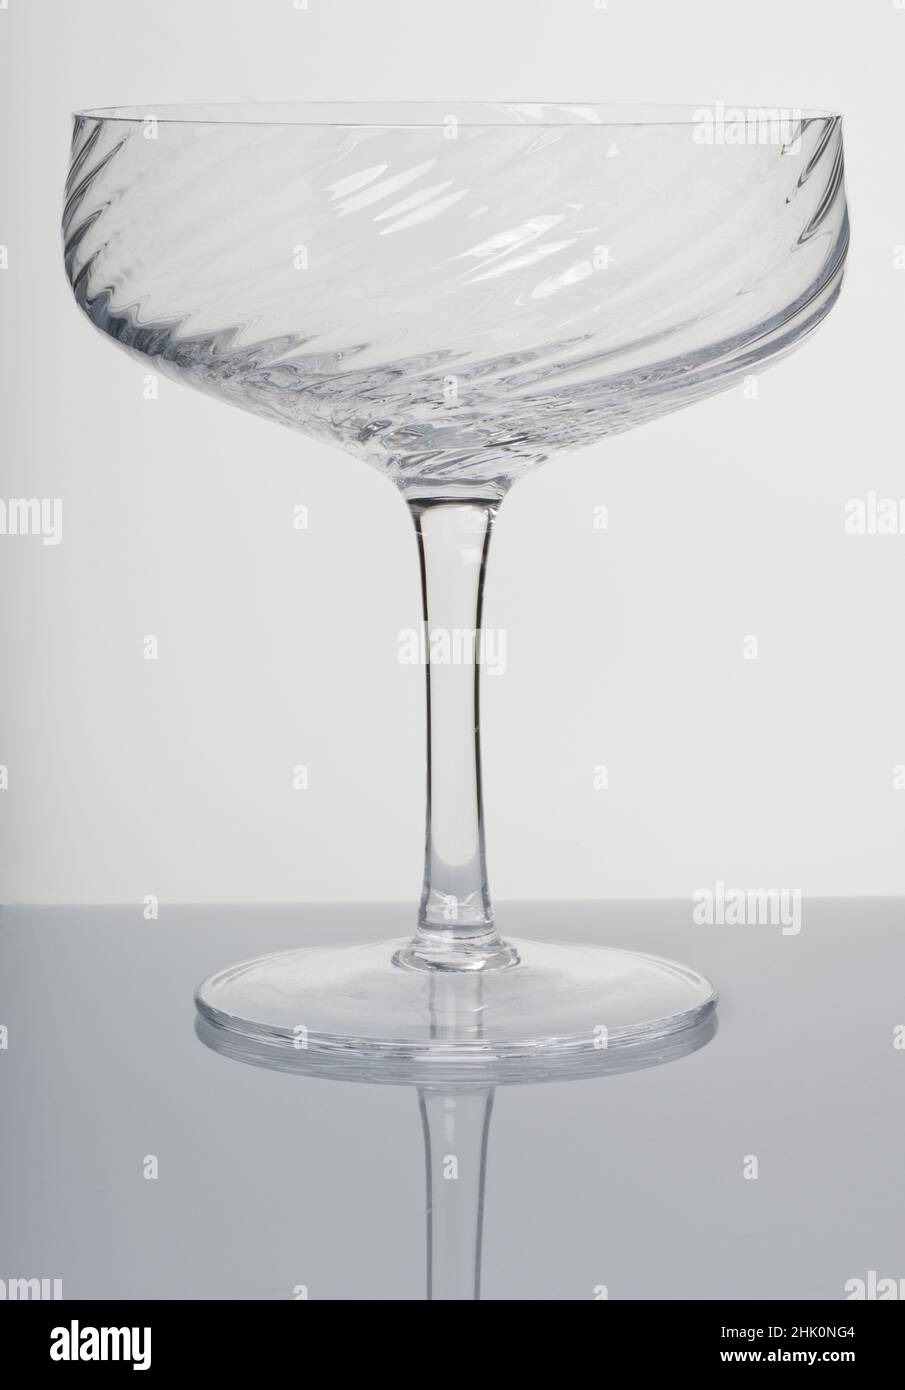 A Champagne coupe glass. Glassware. Drinking vessels or drinkware. Domestic glasses for drinking liquids from. Stock Photo